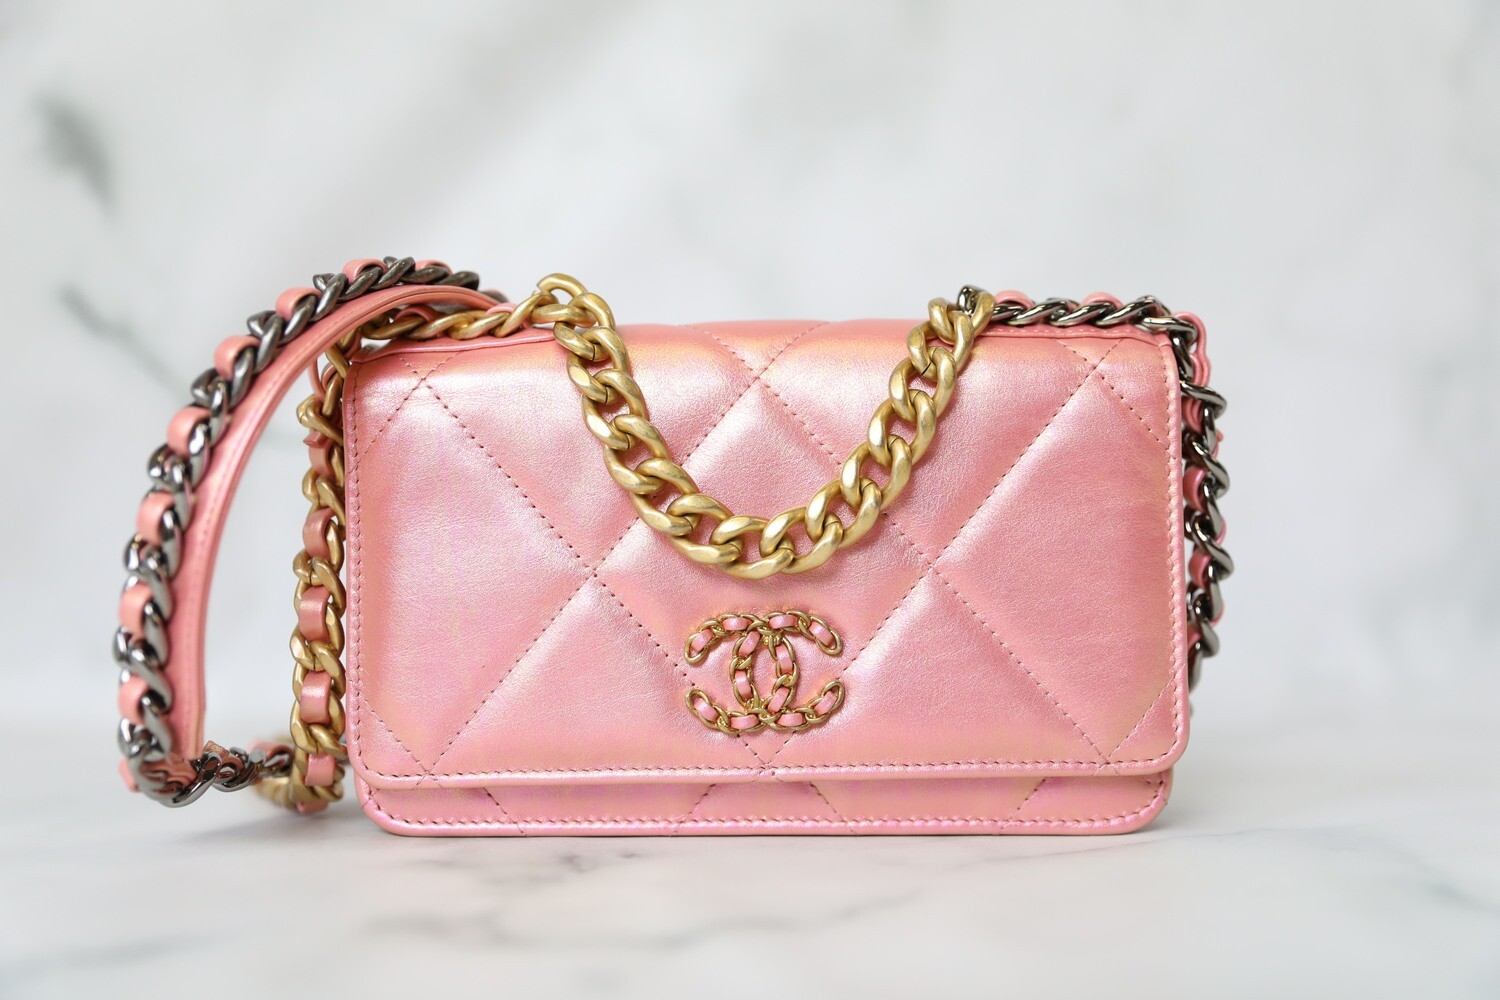 Chanel 19 Wallet on Chain, Pink Iridescent, Preowned in Box WA001